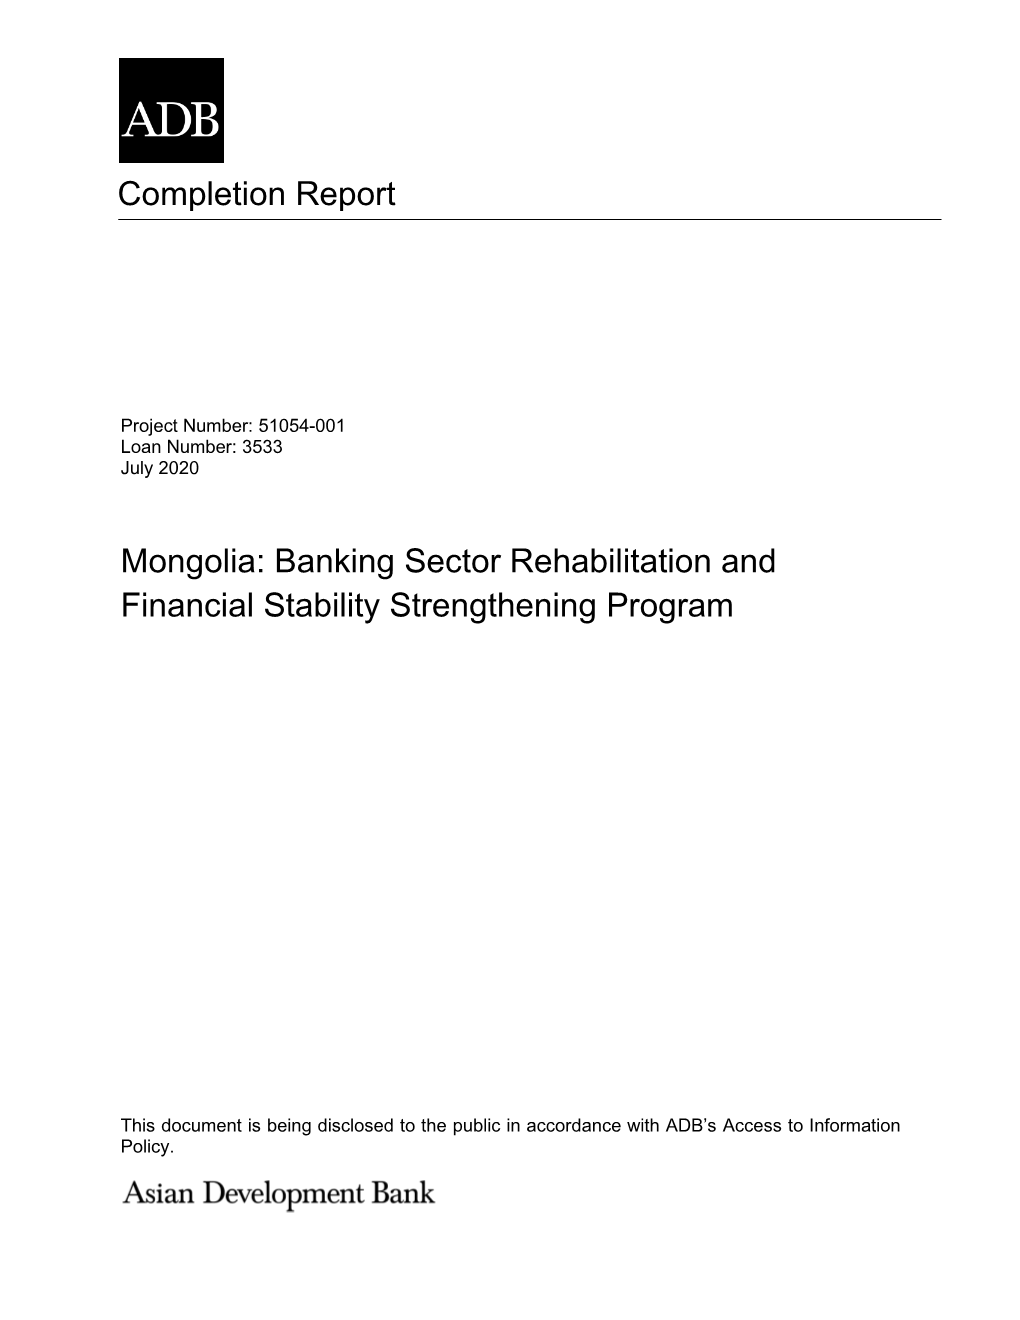 51054-001: Banking Sector Rehabilitation and Financial Stability Strengthening Program